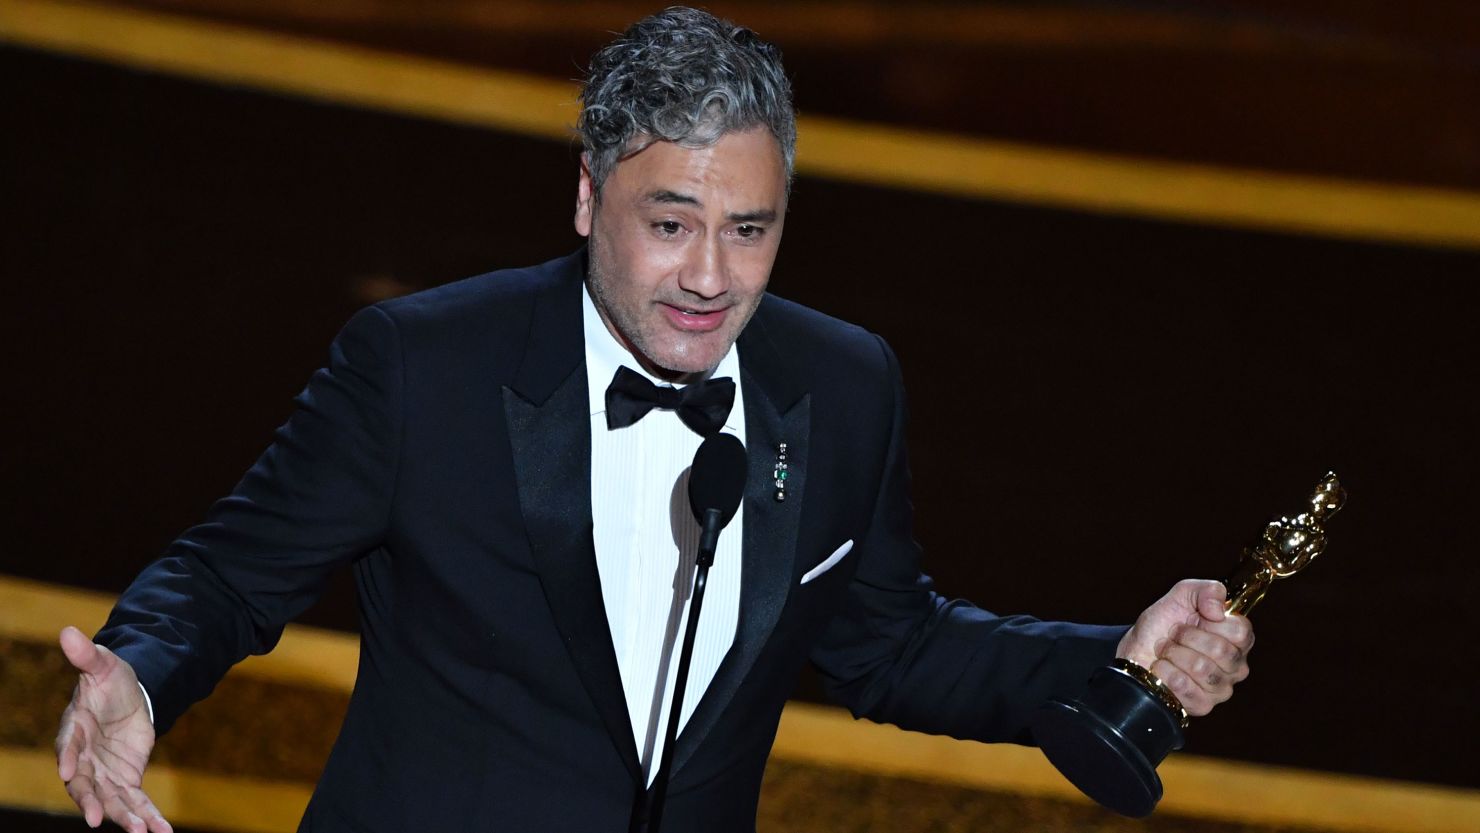 Lord of the Rings' rules Oscars, News